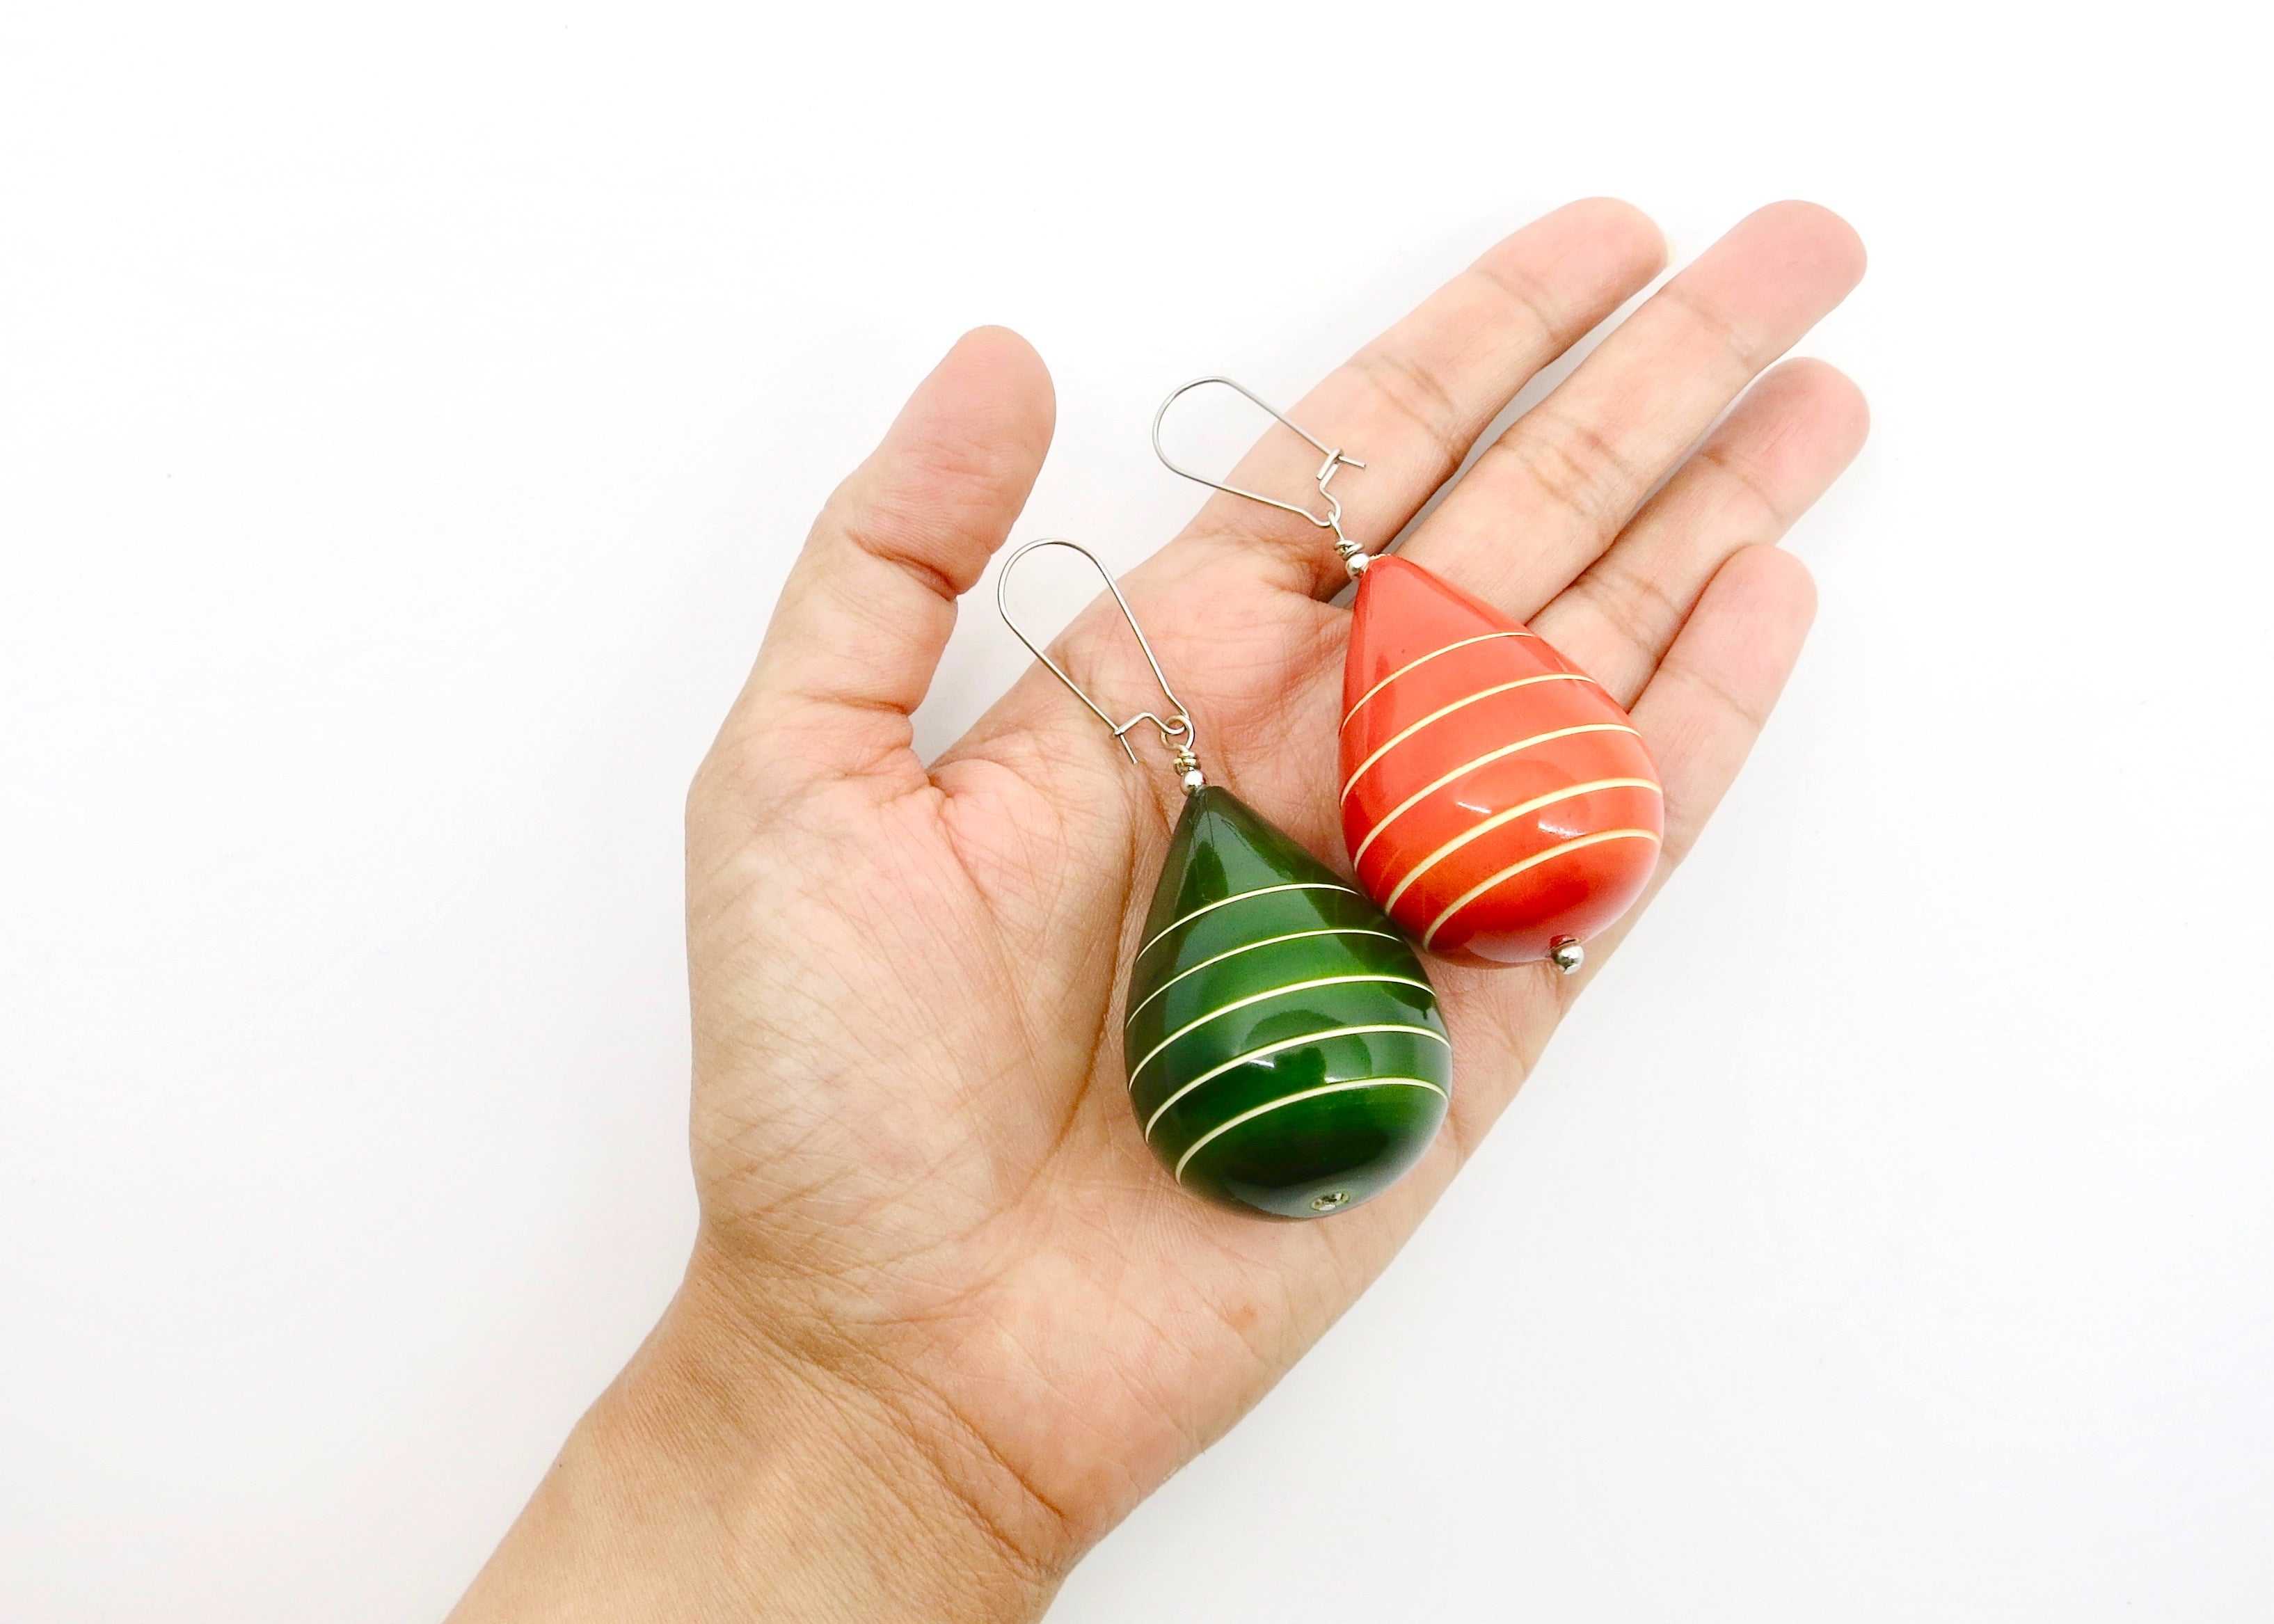 Chubby Rain earrings (available in 4 different colors) - Craft Stories